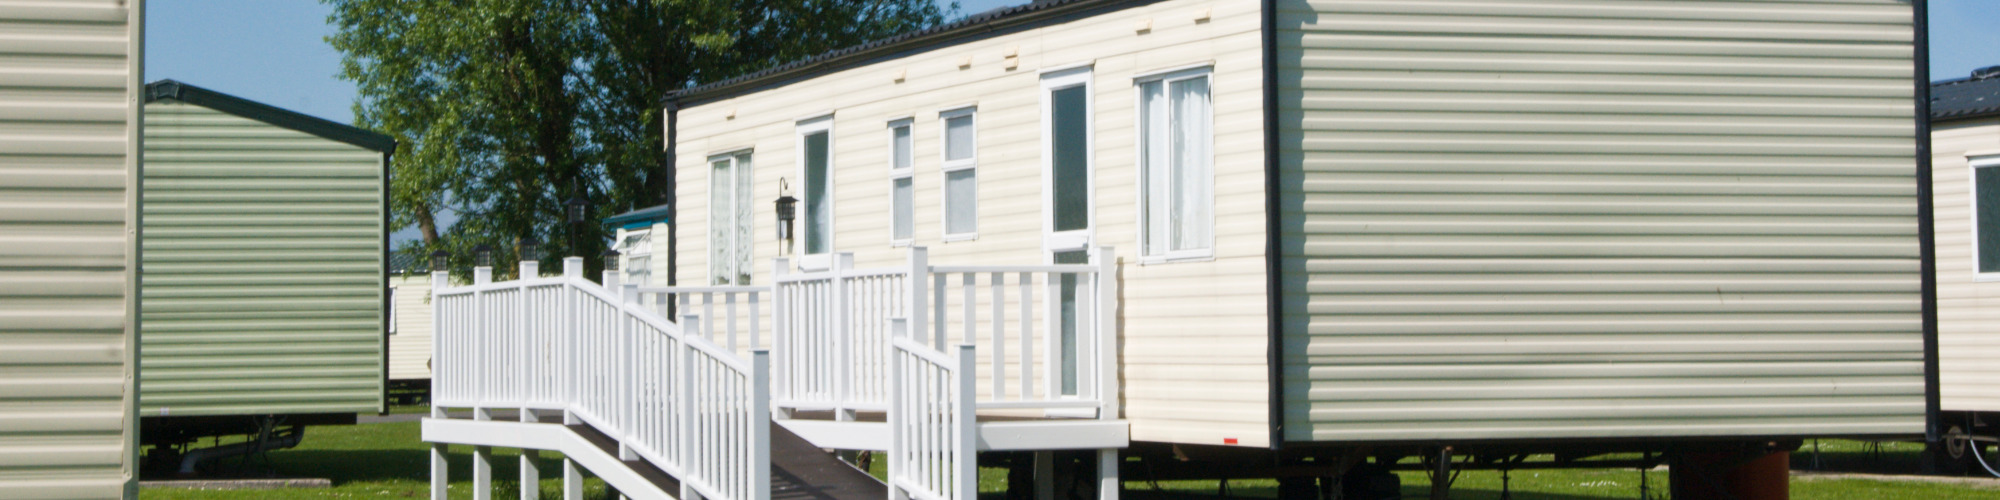 Mobile & Park Homes - Essential Guidance for Conveyancers